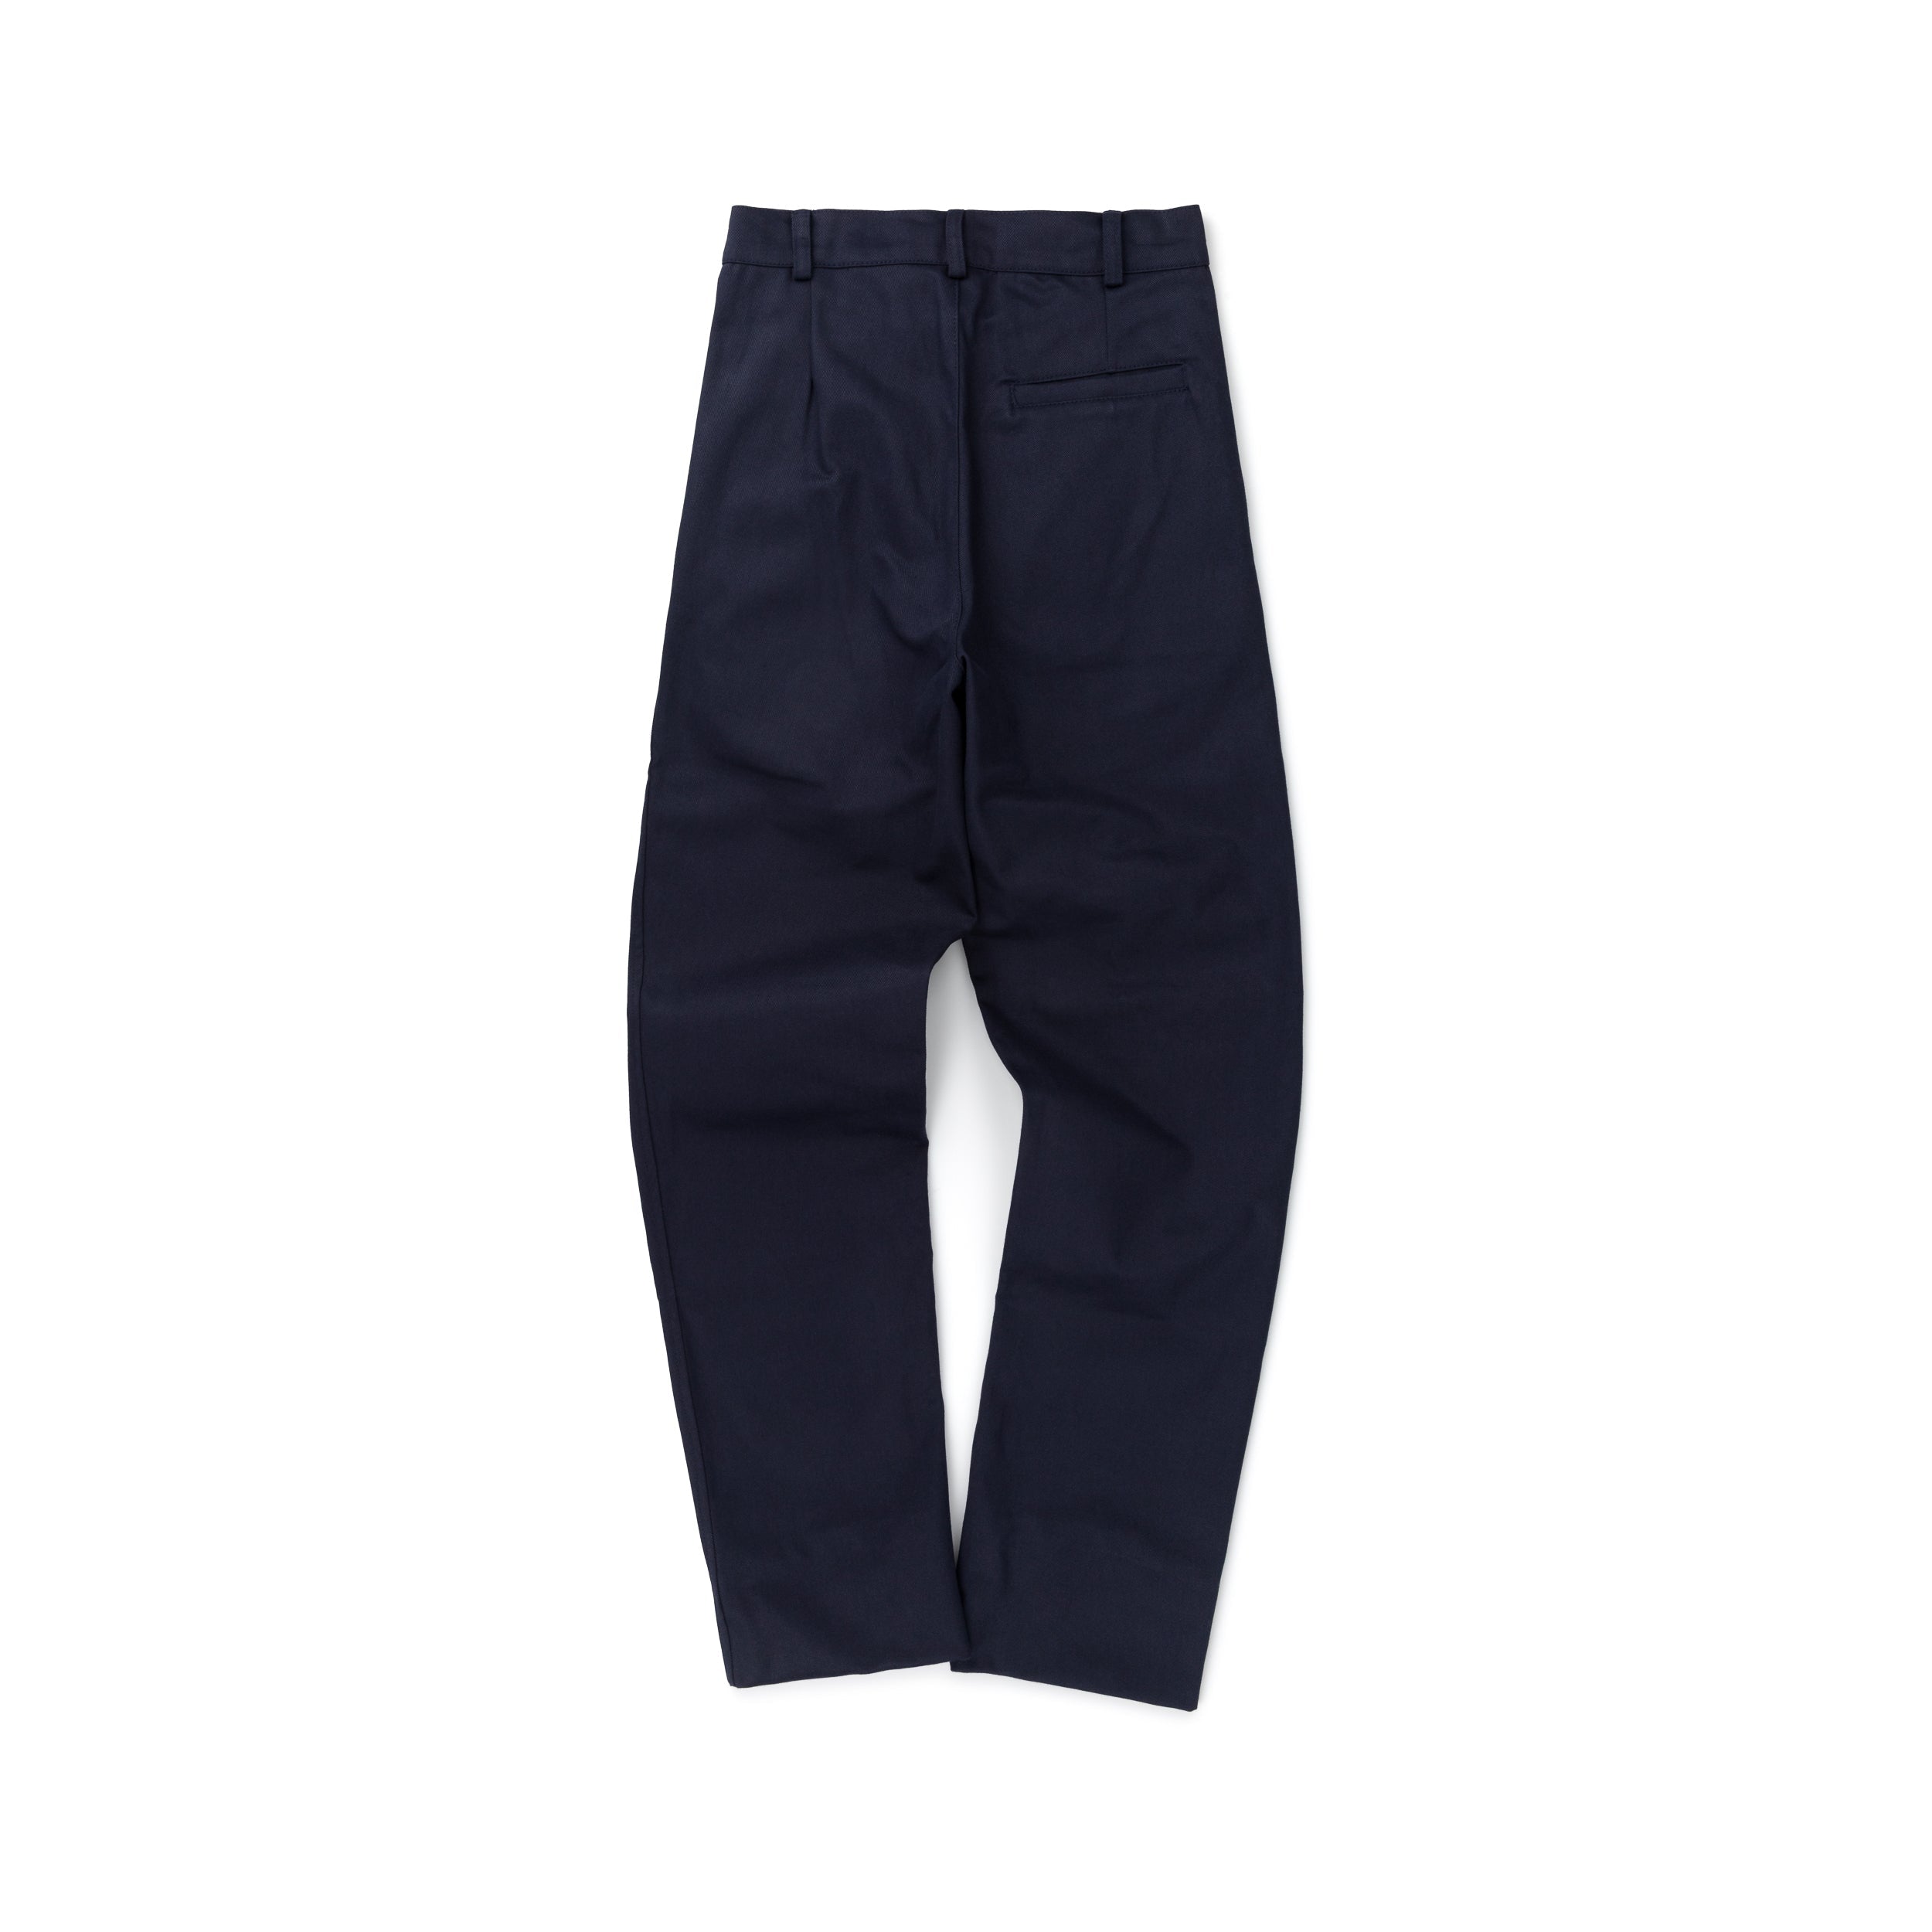 Carrier Company Classic Trouser in Navy Drill